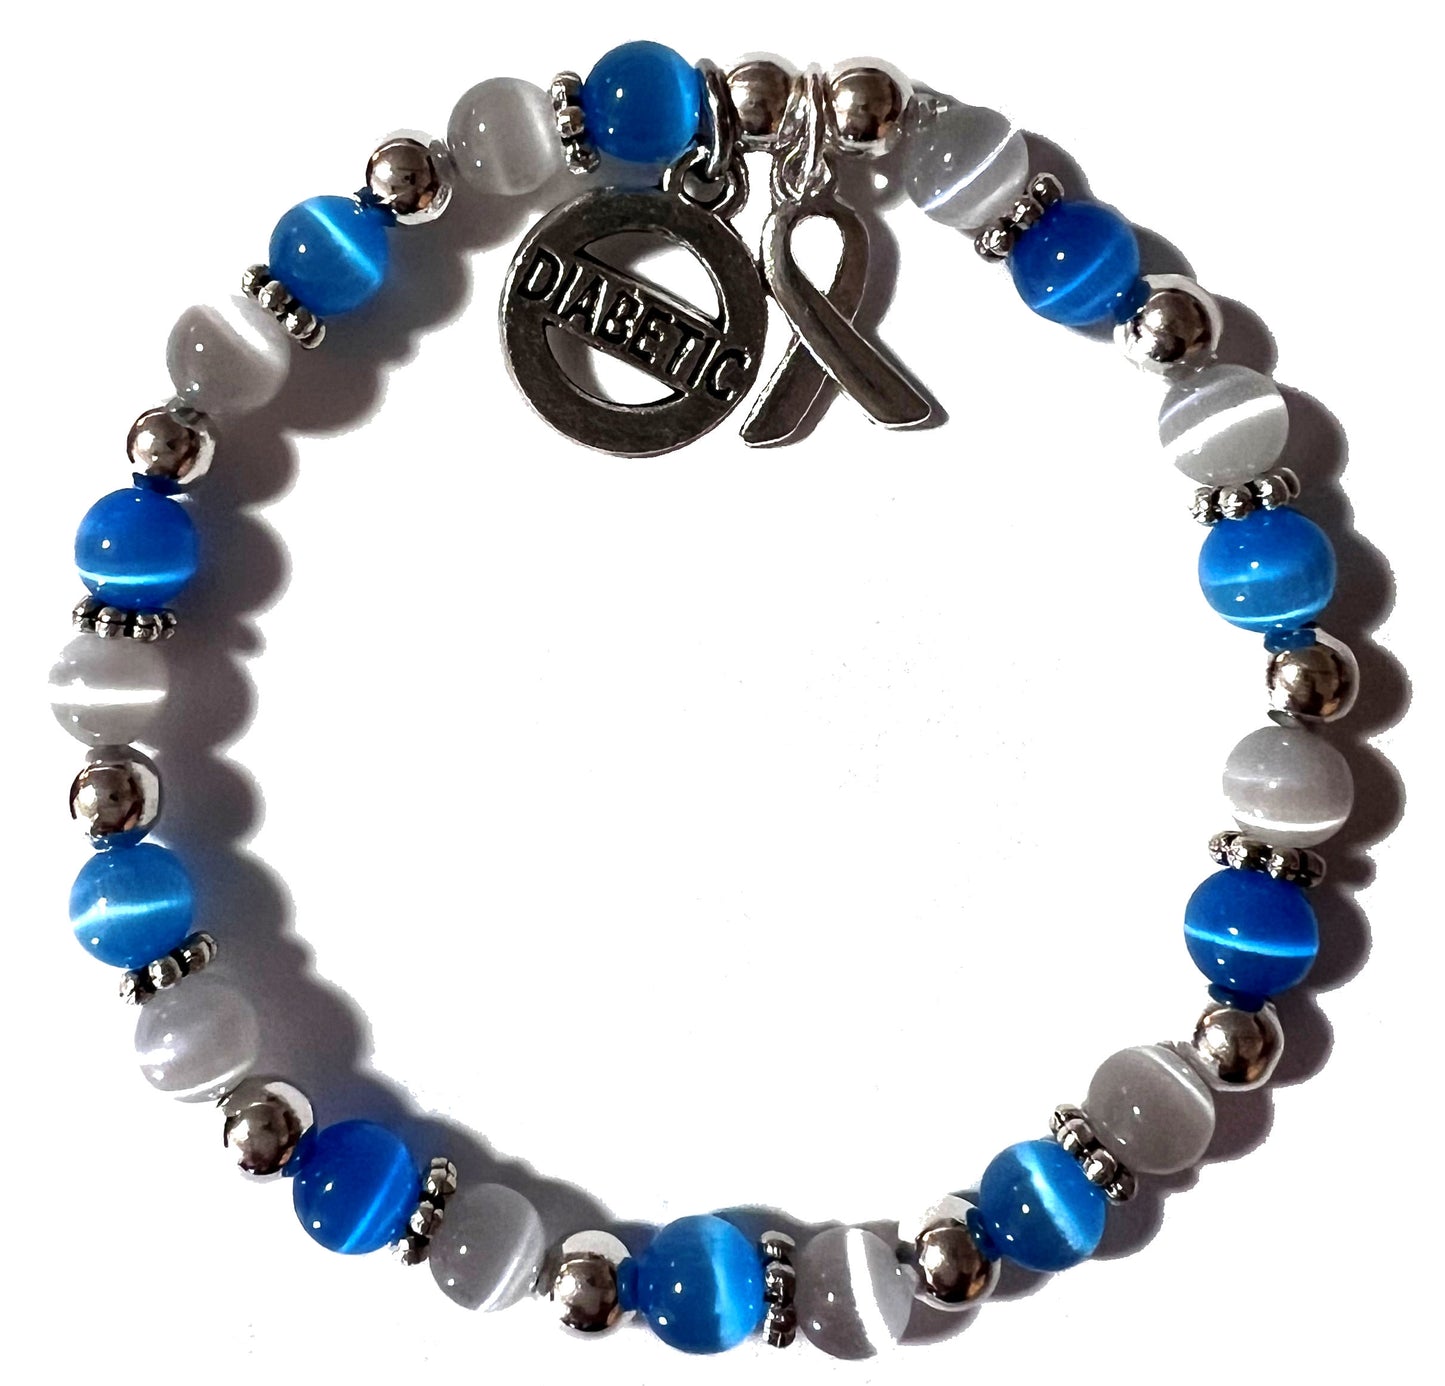 Diabetic, Diabetes Awareness Beaded Bracelet, 7.75 Inches, Grey & Blue Colors, Hand beaded in the USA - Stretch